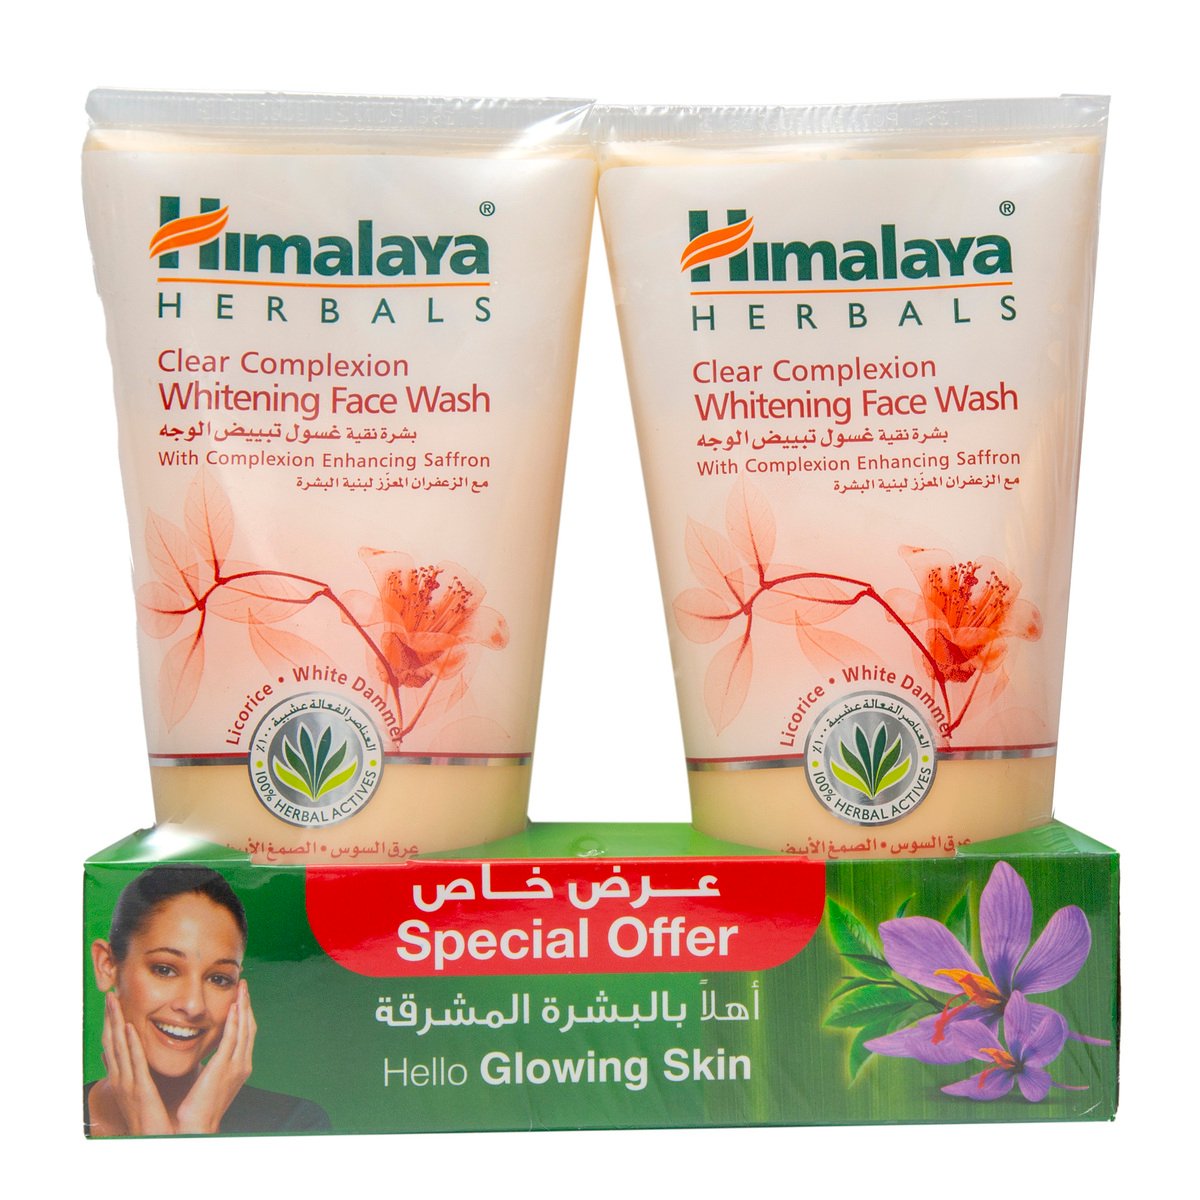 Himalaya Face Wash Clear Complexion Whitening 2 x 150 ml